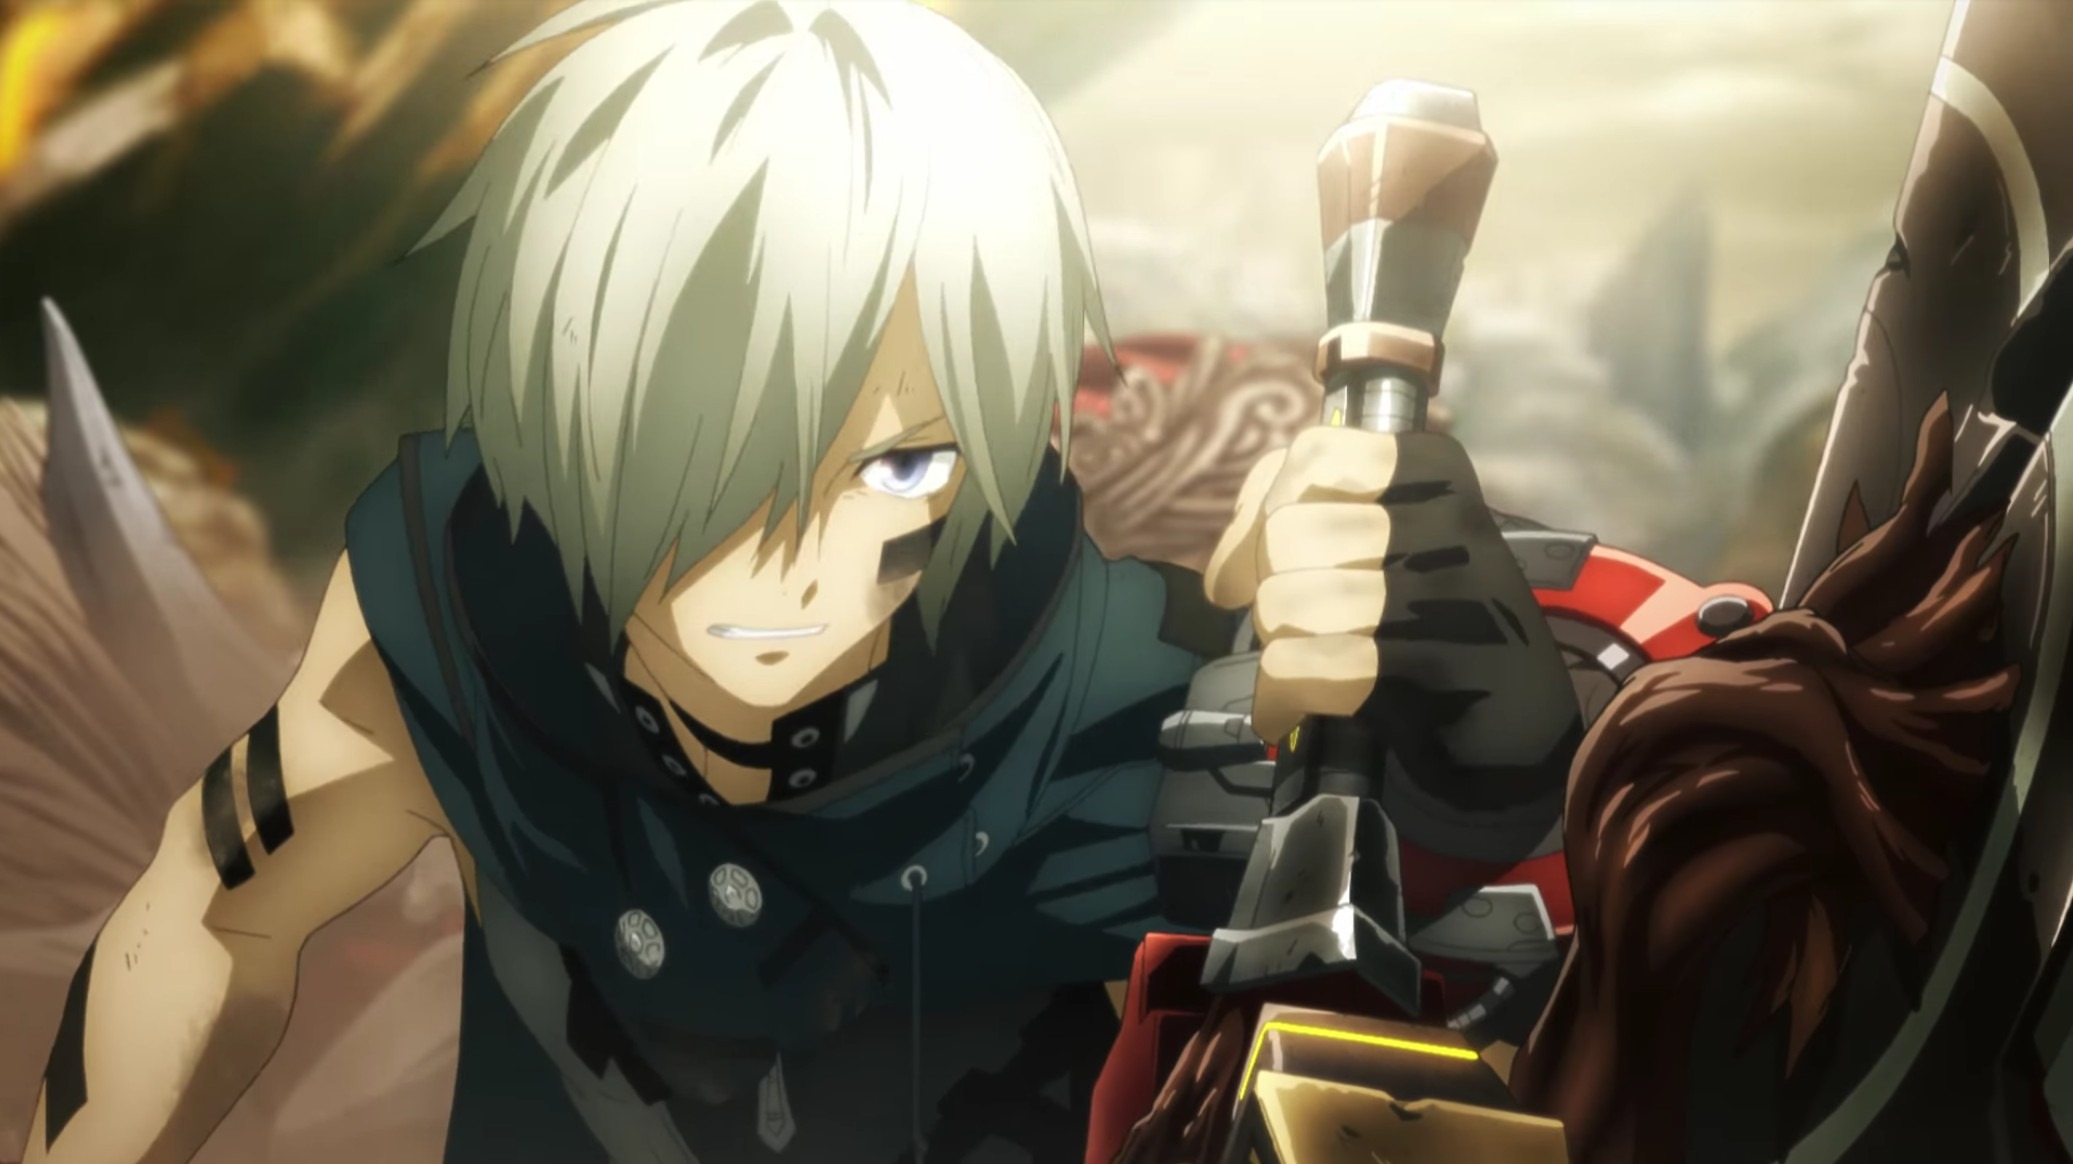 New Key Visual of God Eater two main characters  ranime